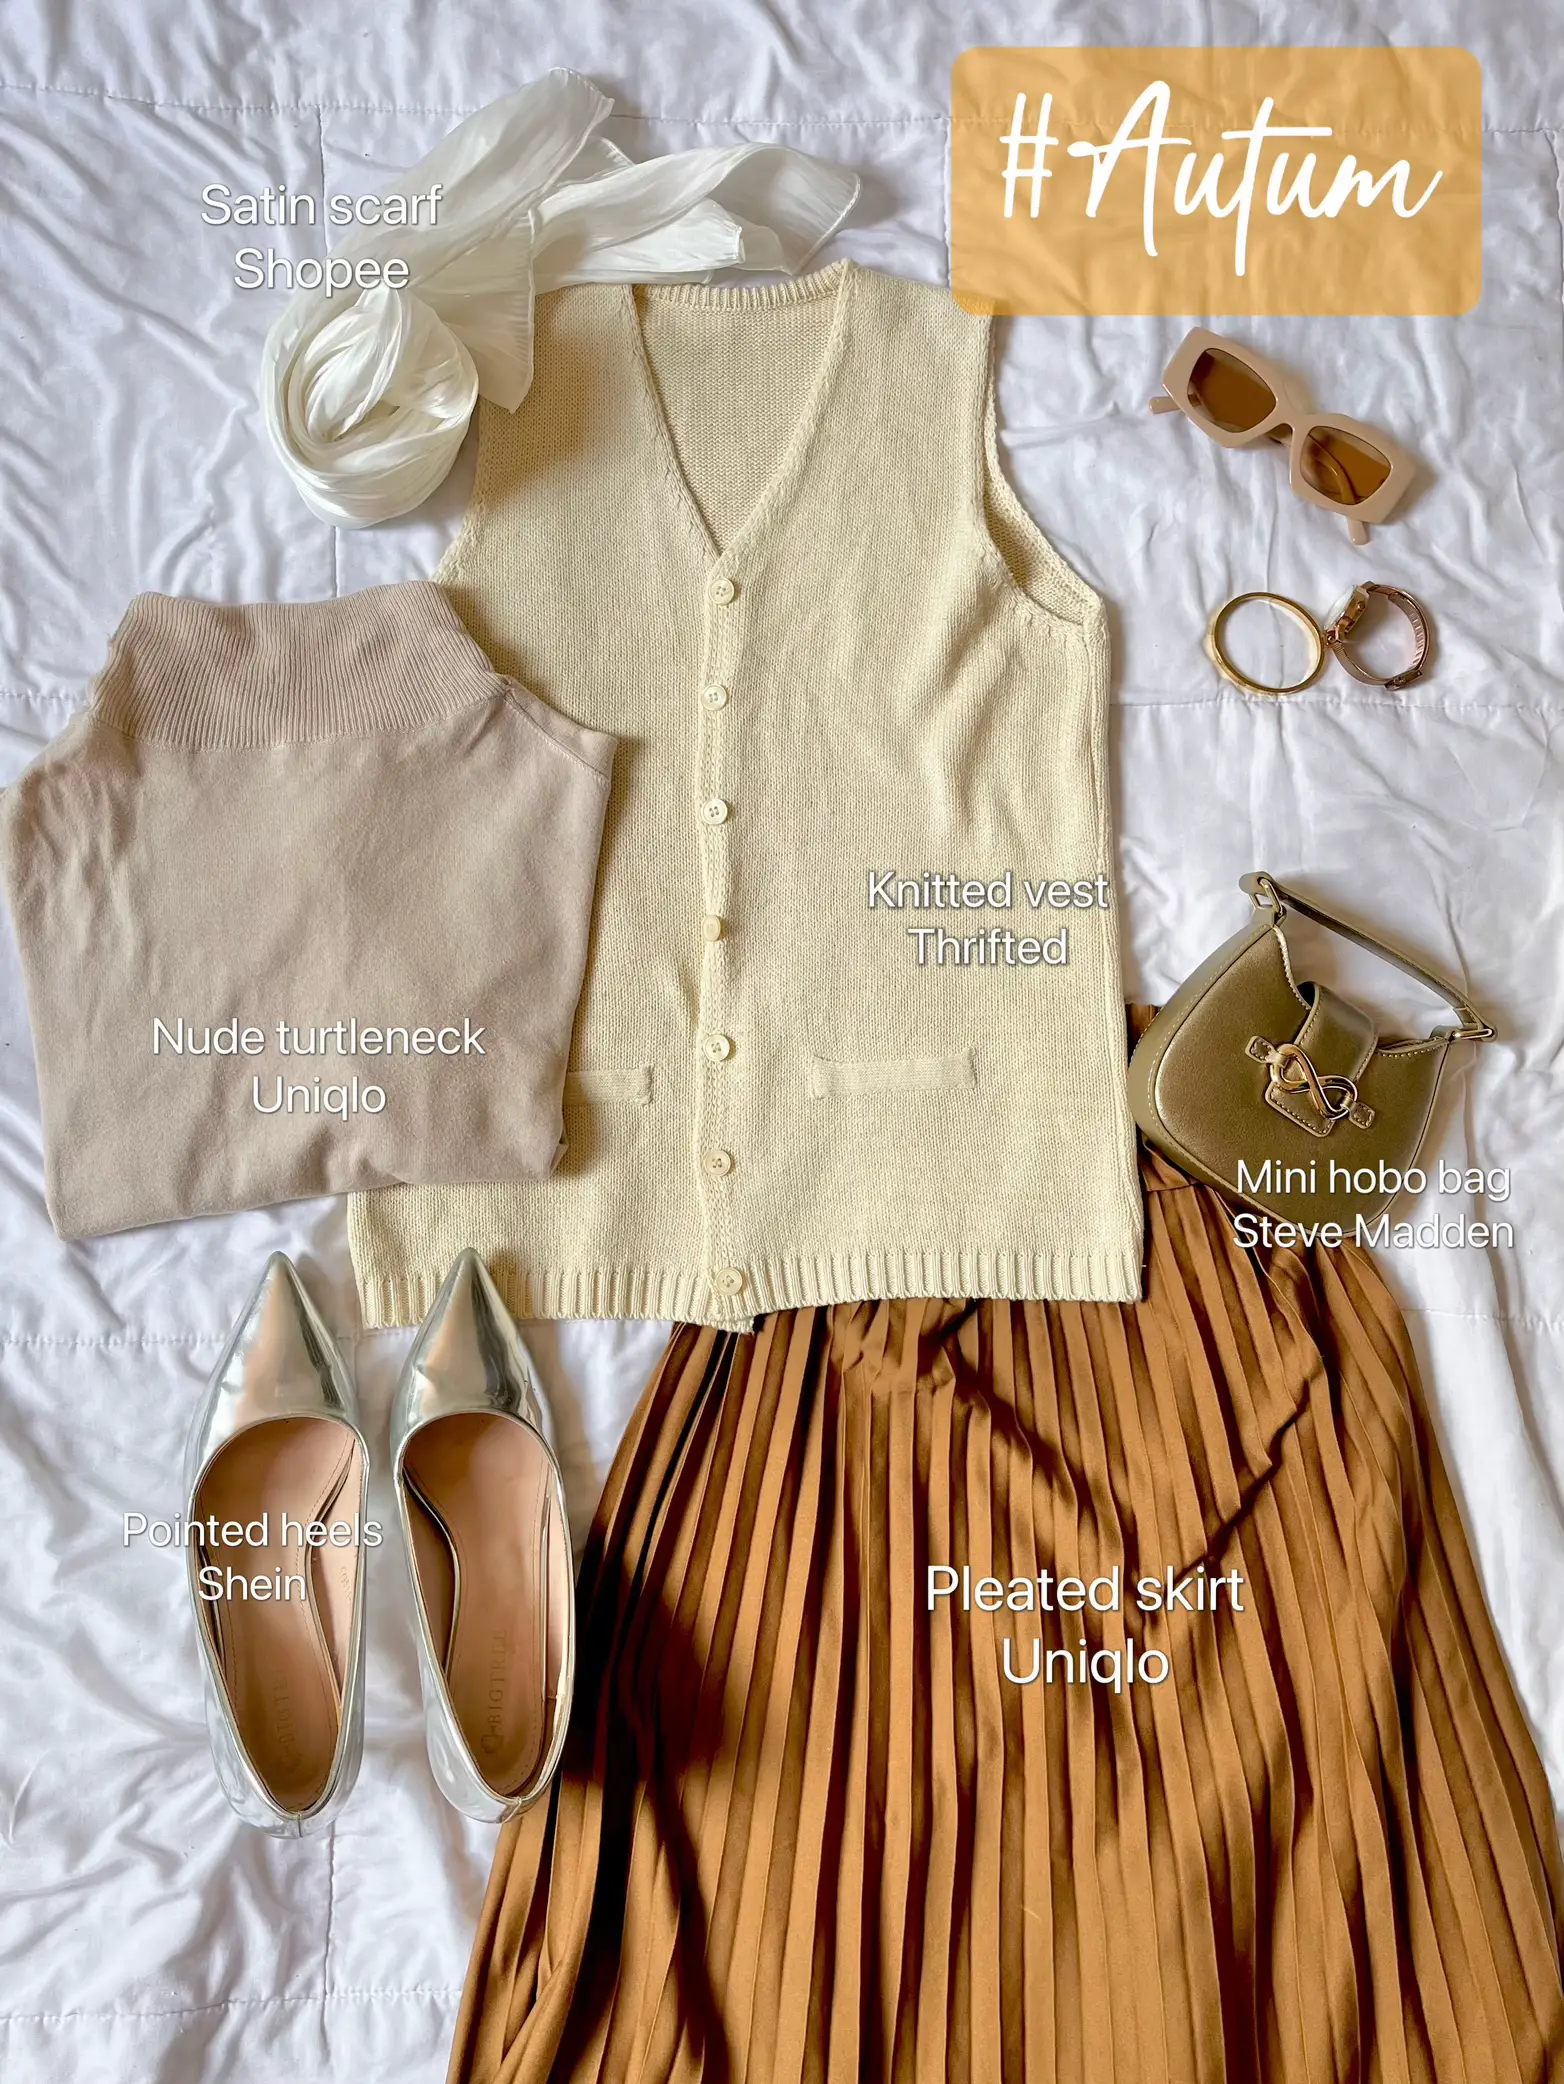 Channel your inner Soft Girl with these outfits!💛, Galeri disiarkan oleh  ArianaC.